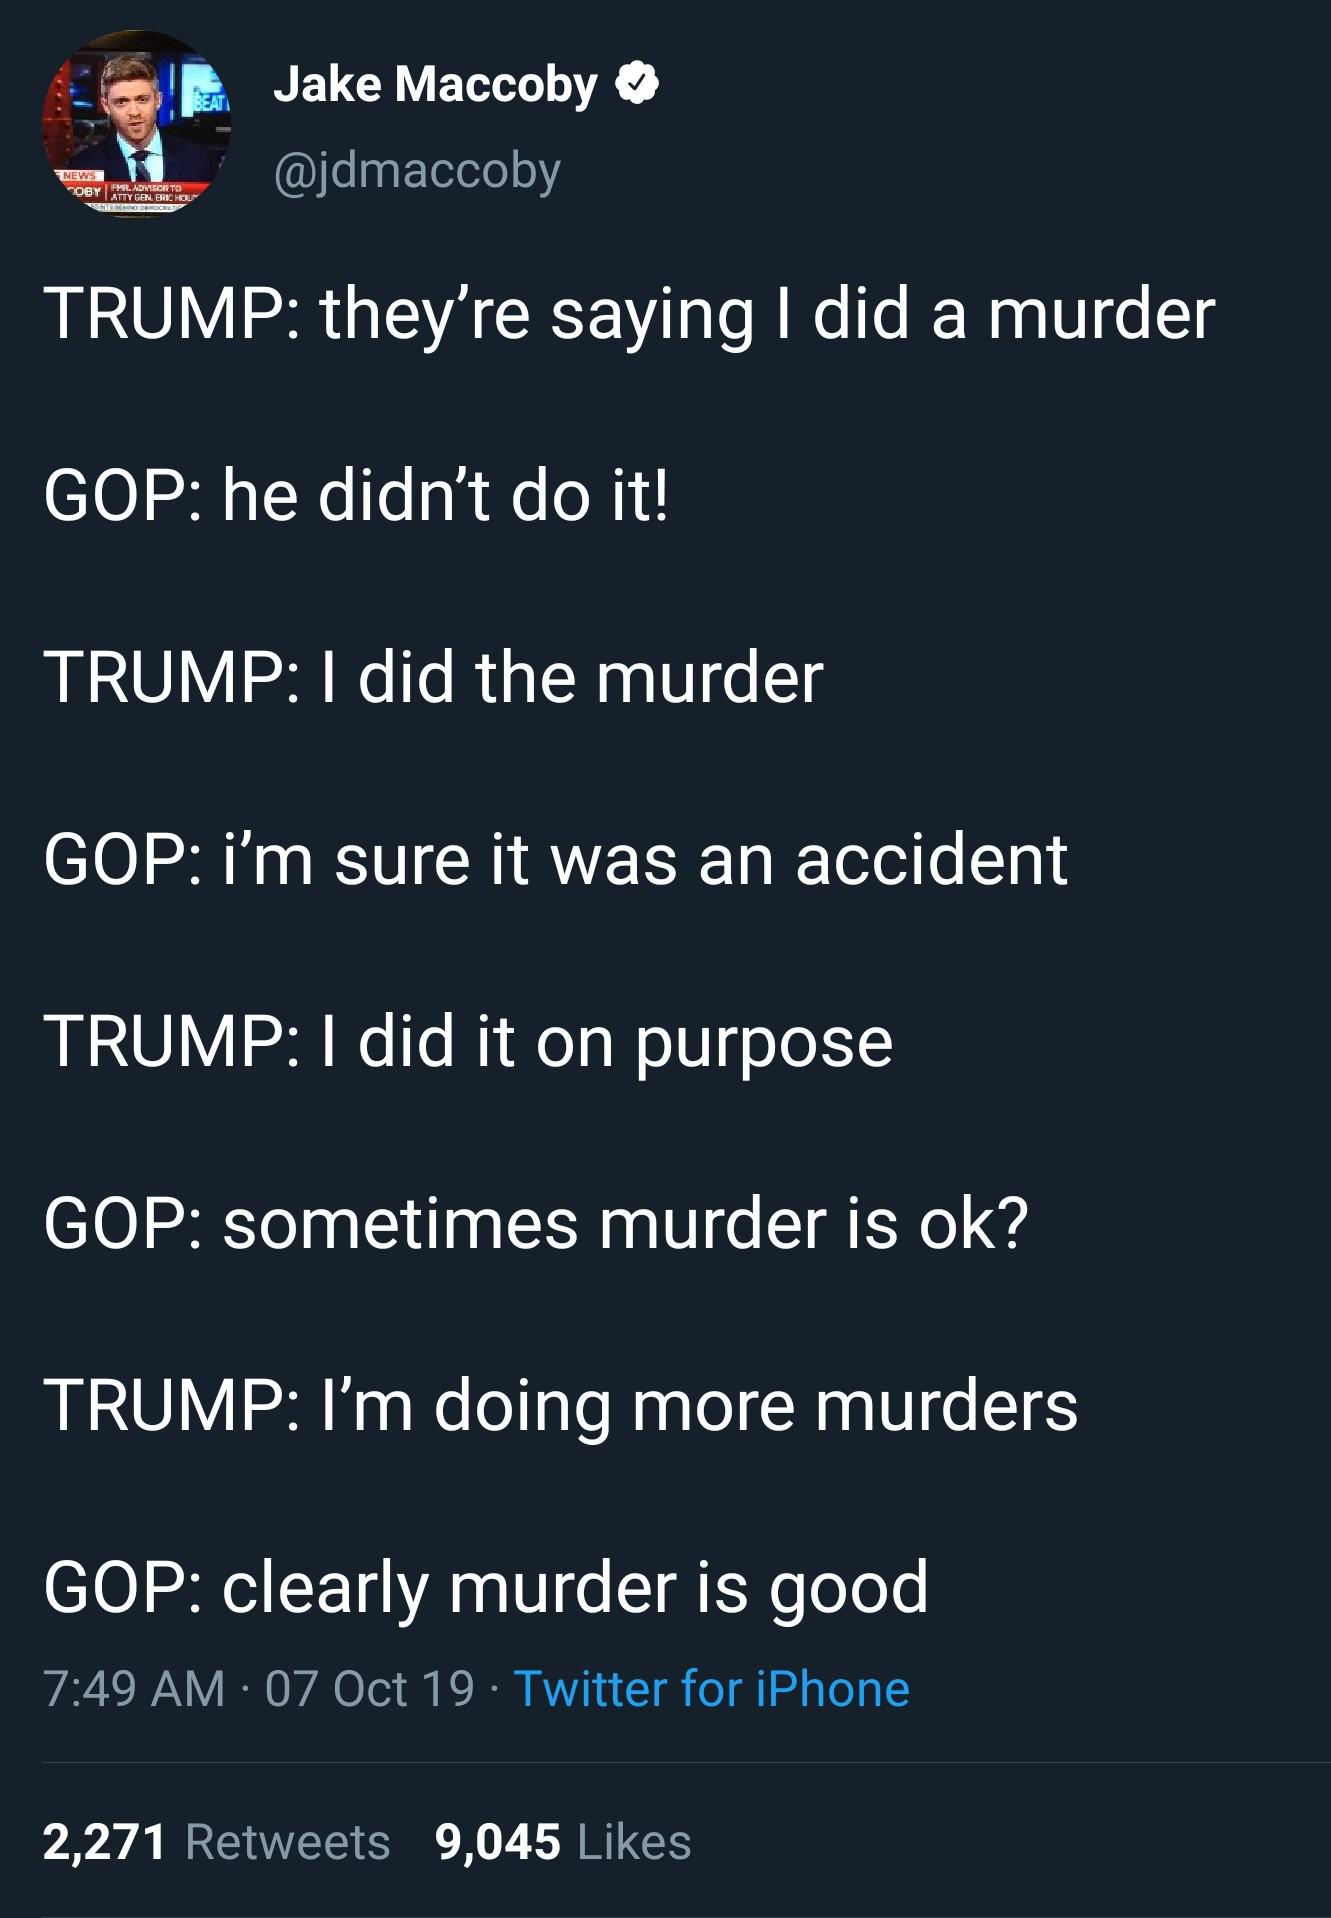 political political-memes political text: B Jake Maccoby O @jdmaccoby TRUMP: they're saying I did a murder GOP: he didn't do it! TRUMP: I did the murder GOP: i'm sure it was an accident TRUMP: I did it on purpose GOP: sometimes murder is ok? TRUMP: I'm doing more murders GOP: clearly murder is good 7:49 AM • 07 Oct 19 • Twitter for iPhone Likes 2,271 Retweets 9,045 